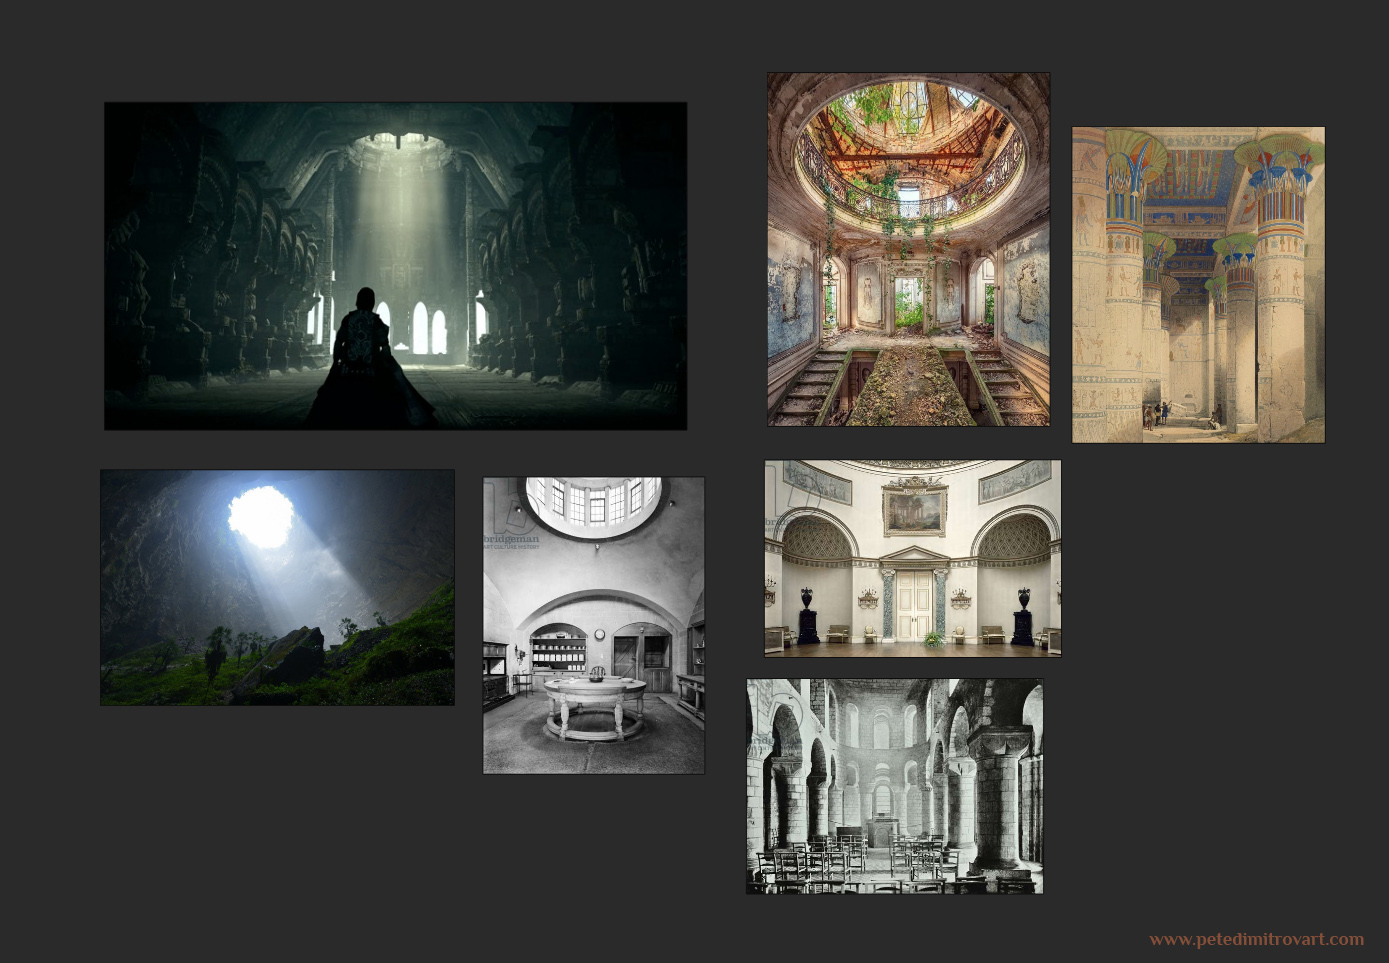 Six photos put next to one another. The seventh is a game screenshot from “Shadow of the Colossus”. The others feature baroque and other architectural styles of circular rooms. Most have an opening in the ceiling that hosts set of windows that leak light in. Another photo is of a cave with god rays coming from open ceiling.